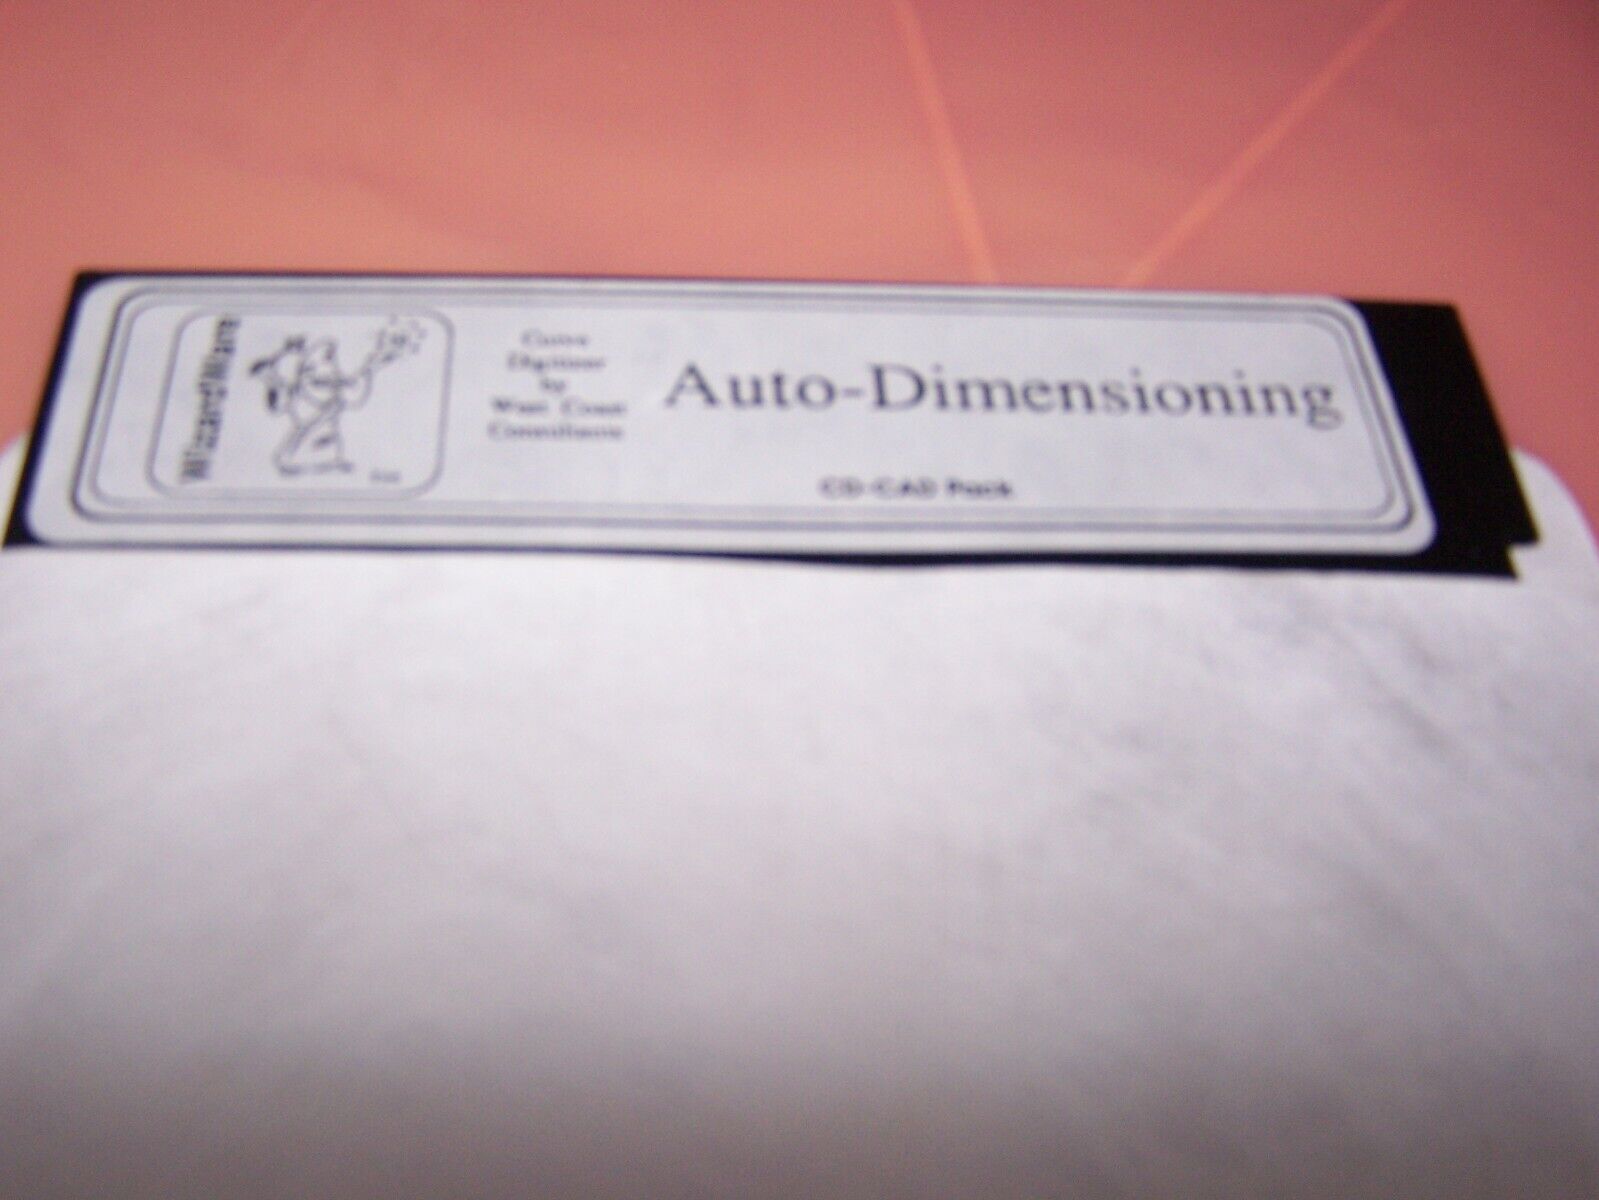 Vintage WixardWare Auto-Dimensioning software for PC